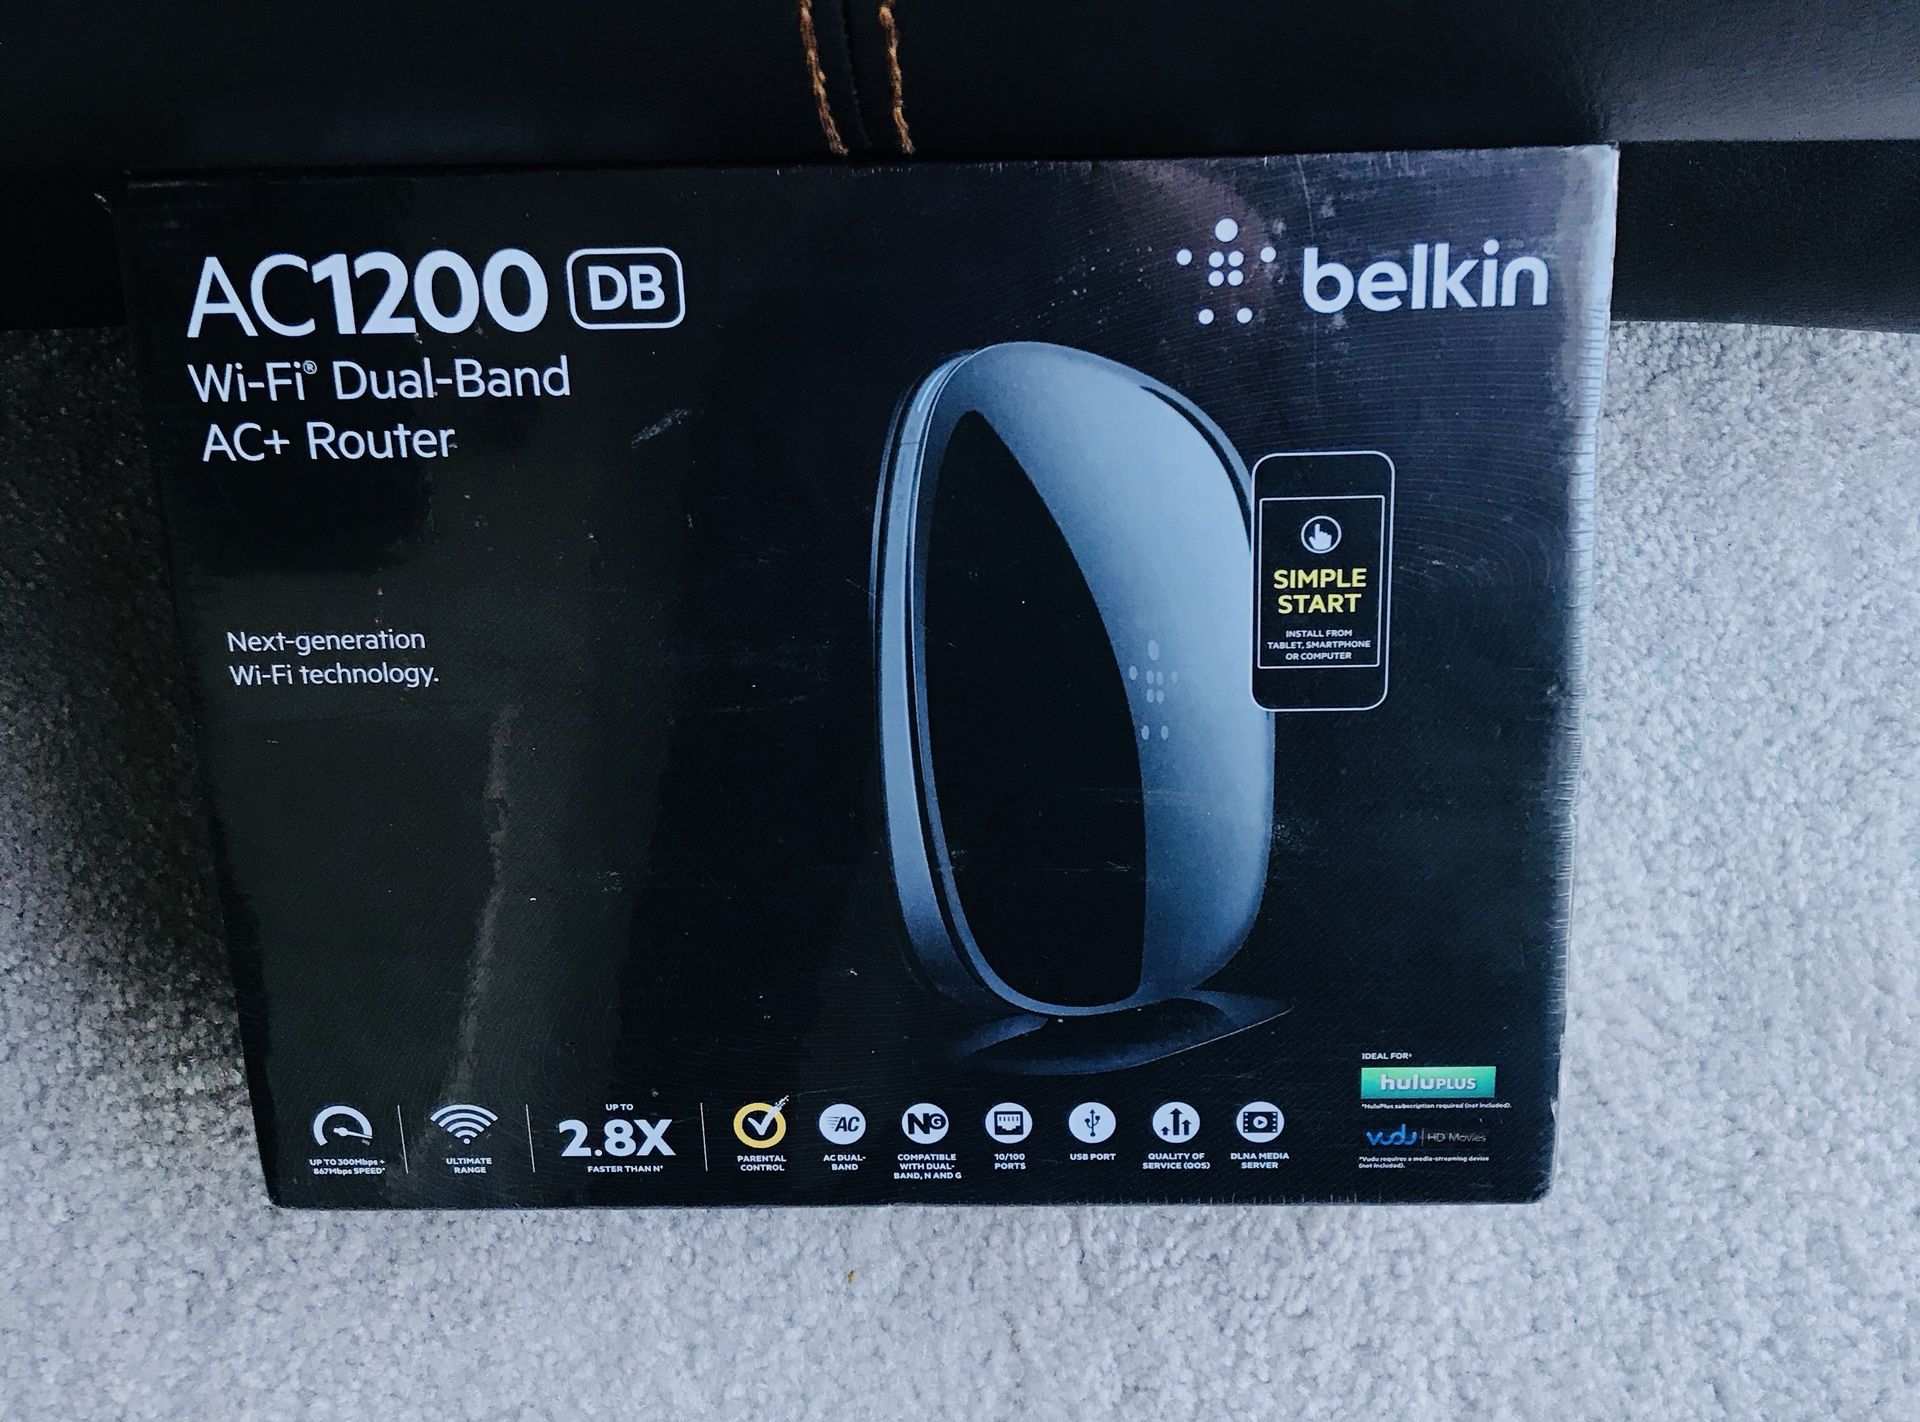 Brand New in box/ sealed - Belkin AC1200db Wifi dual-band router (mobile app included)